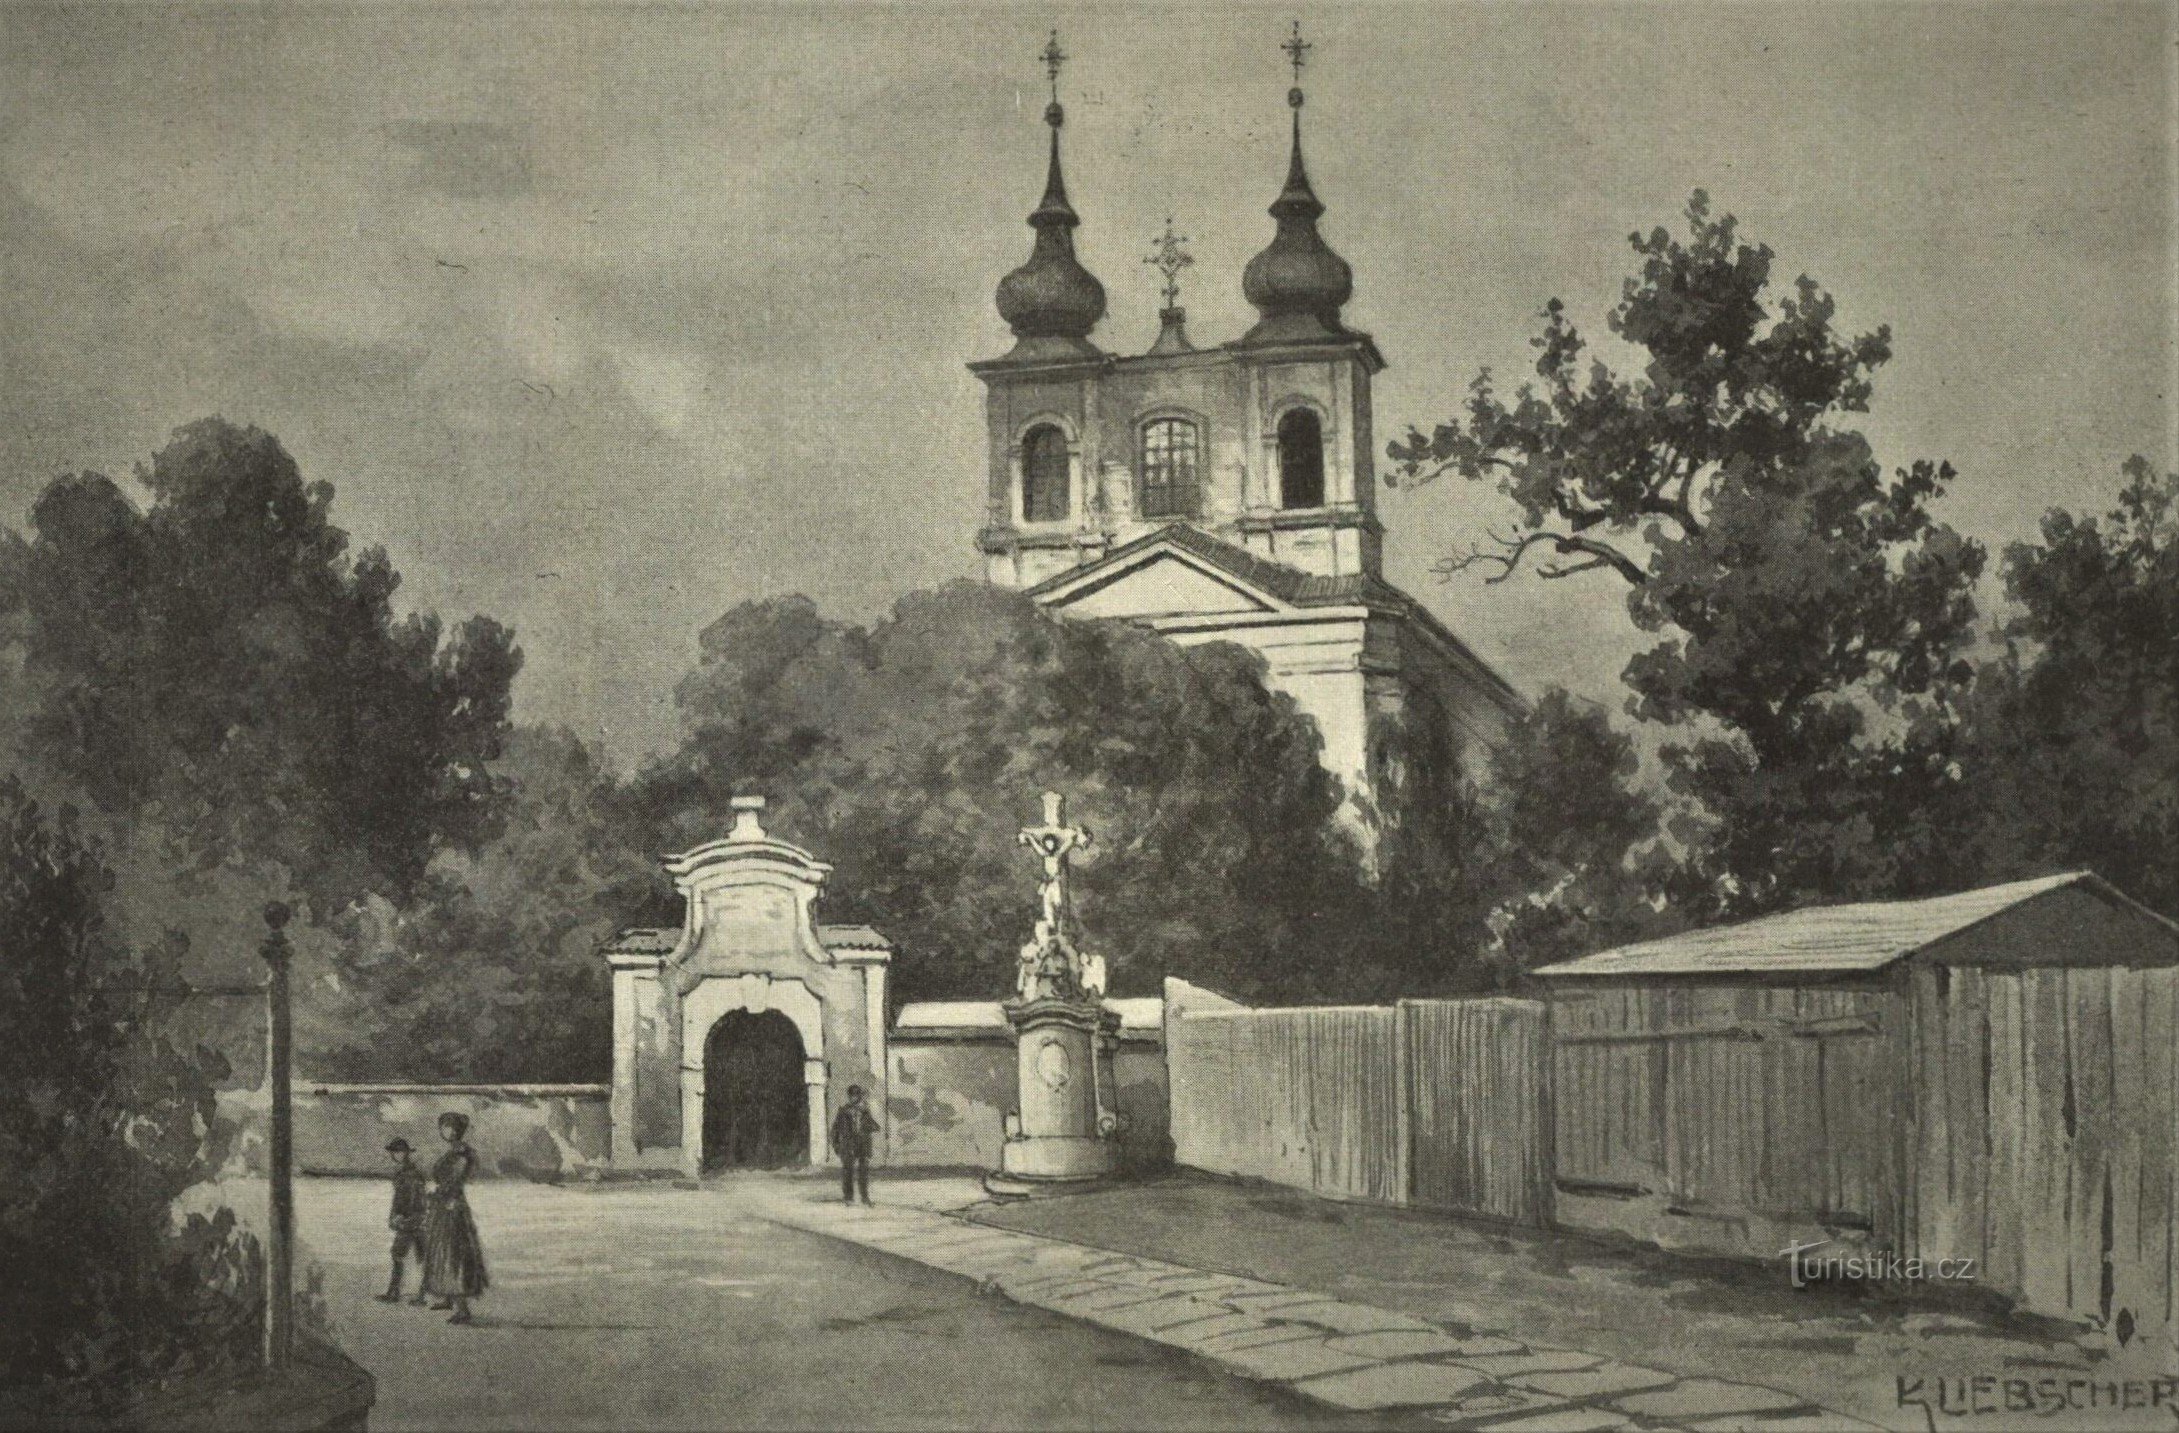 Church of the Holy Trinity in Nové Bydžov at the end of the 19th century